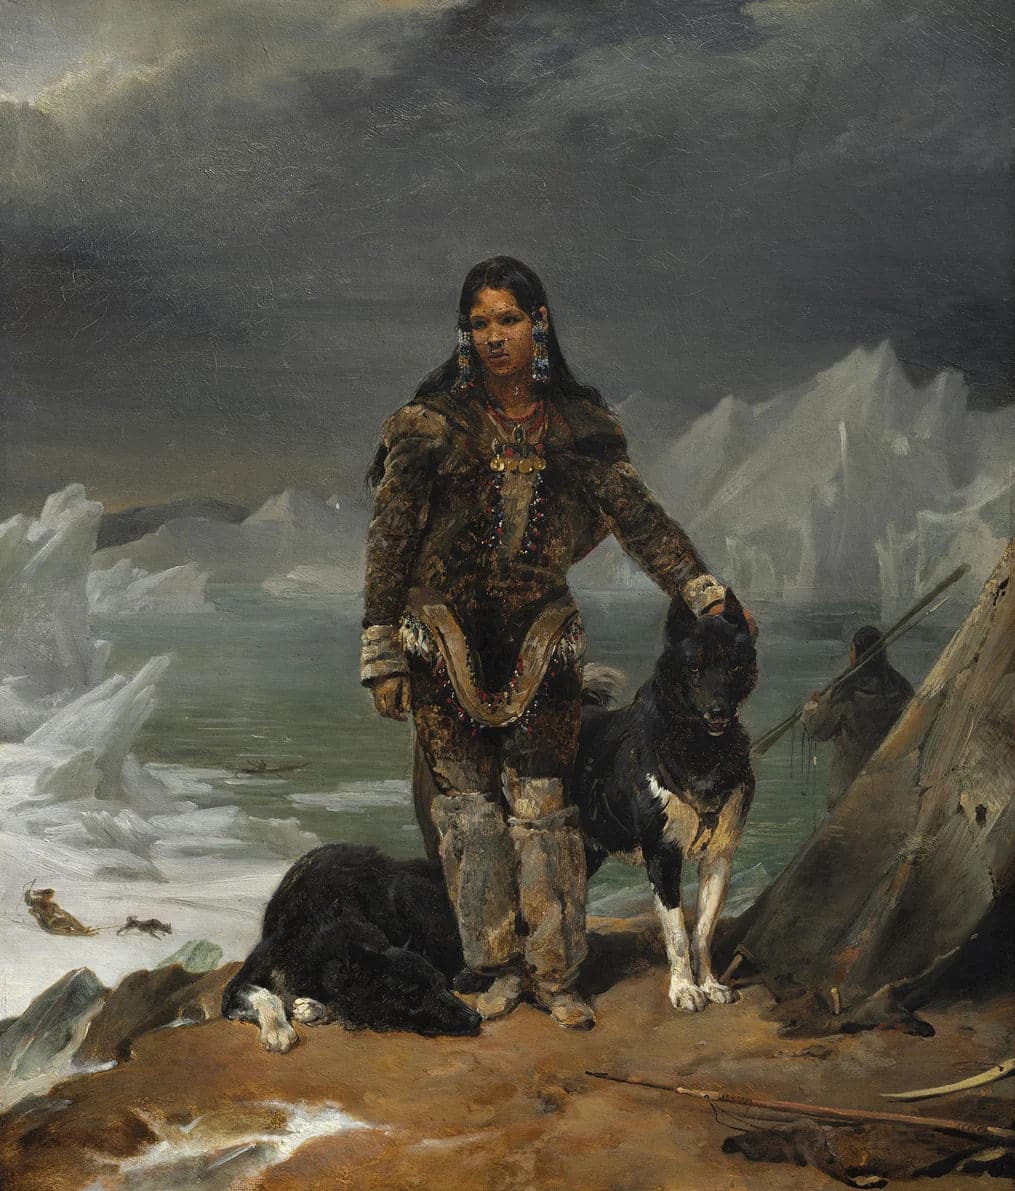 Framed 1 Panel - A Woman from the Land of Eskimos (1826) by Leon Cogniet